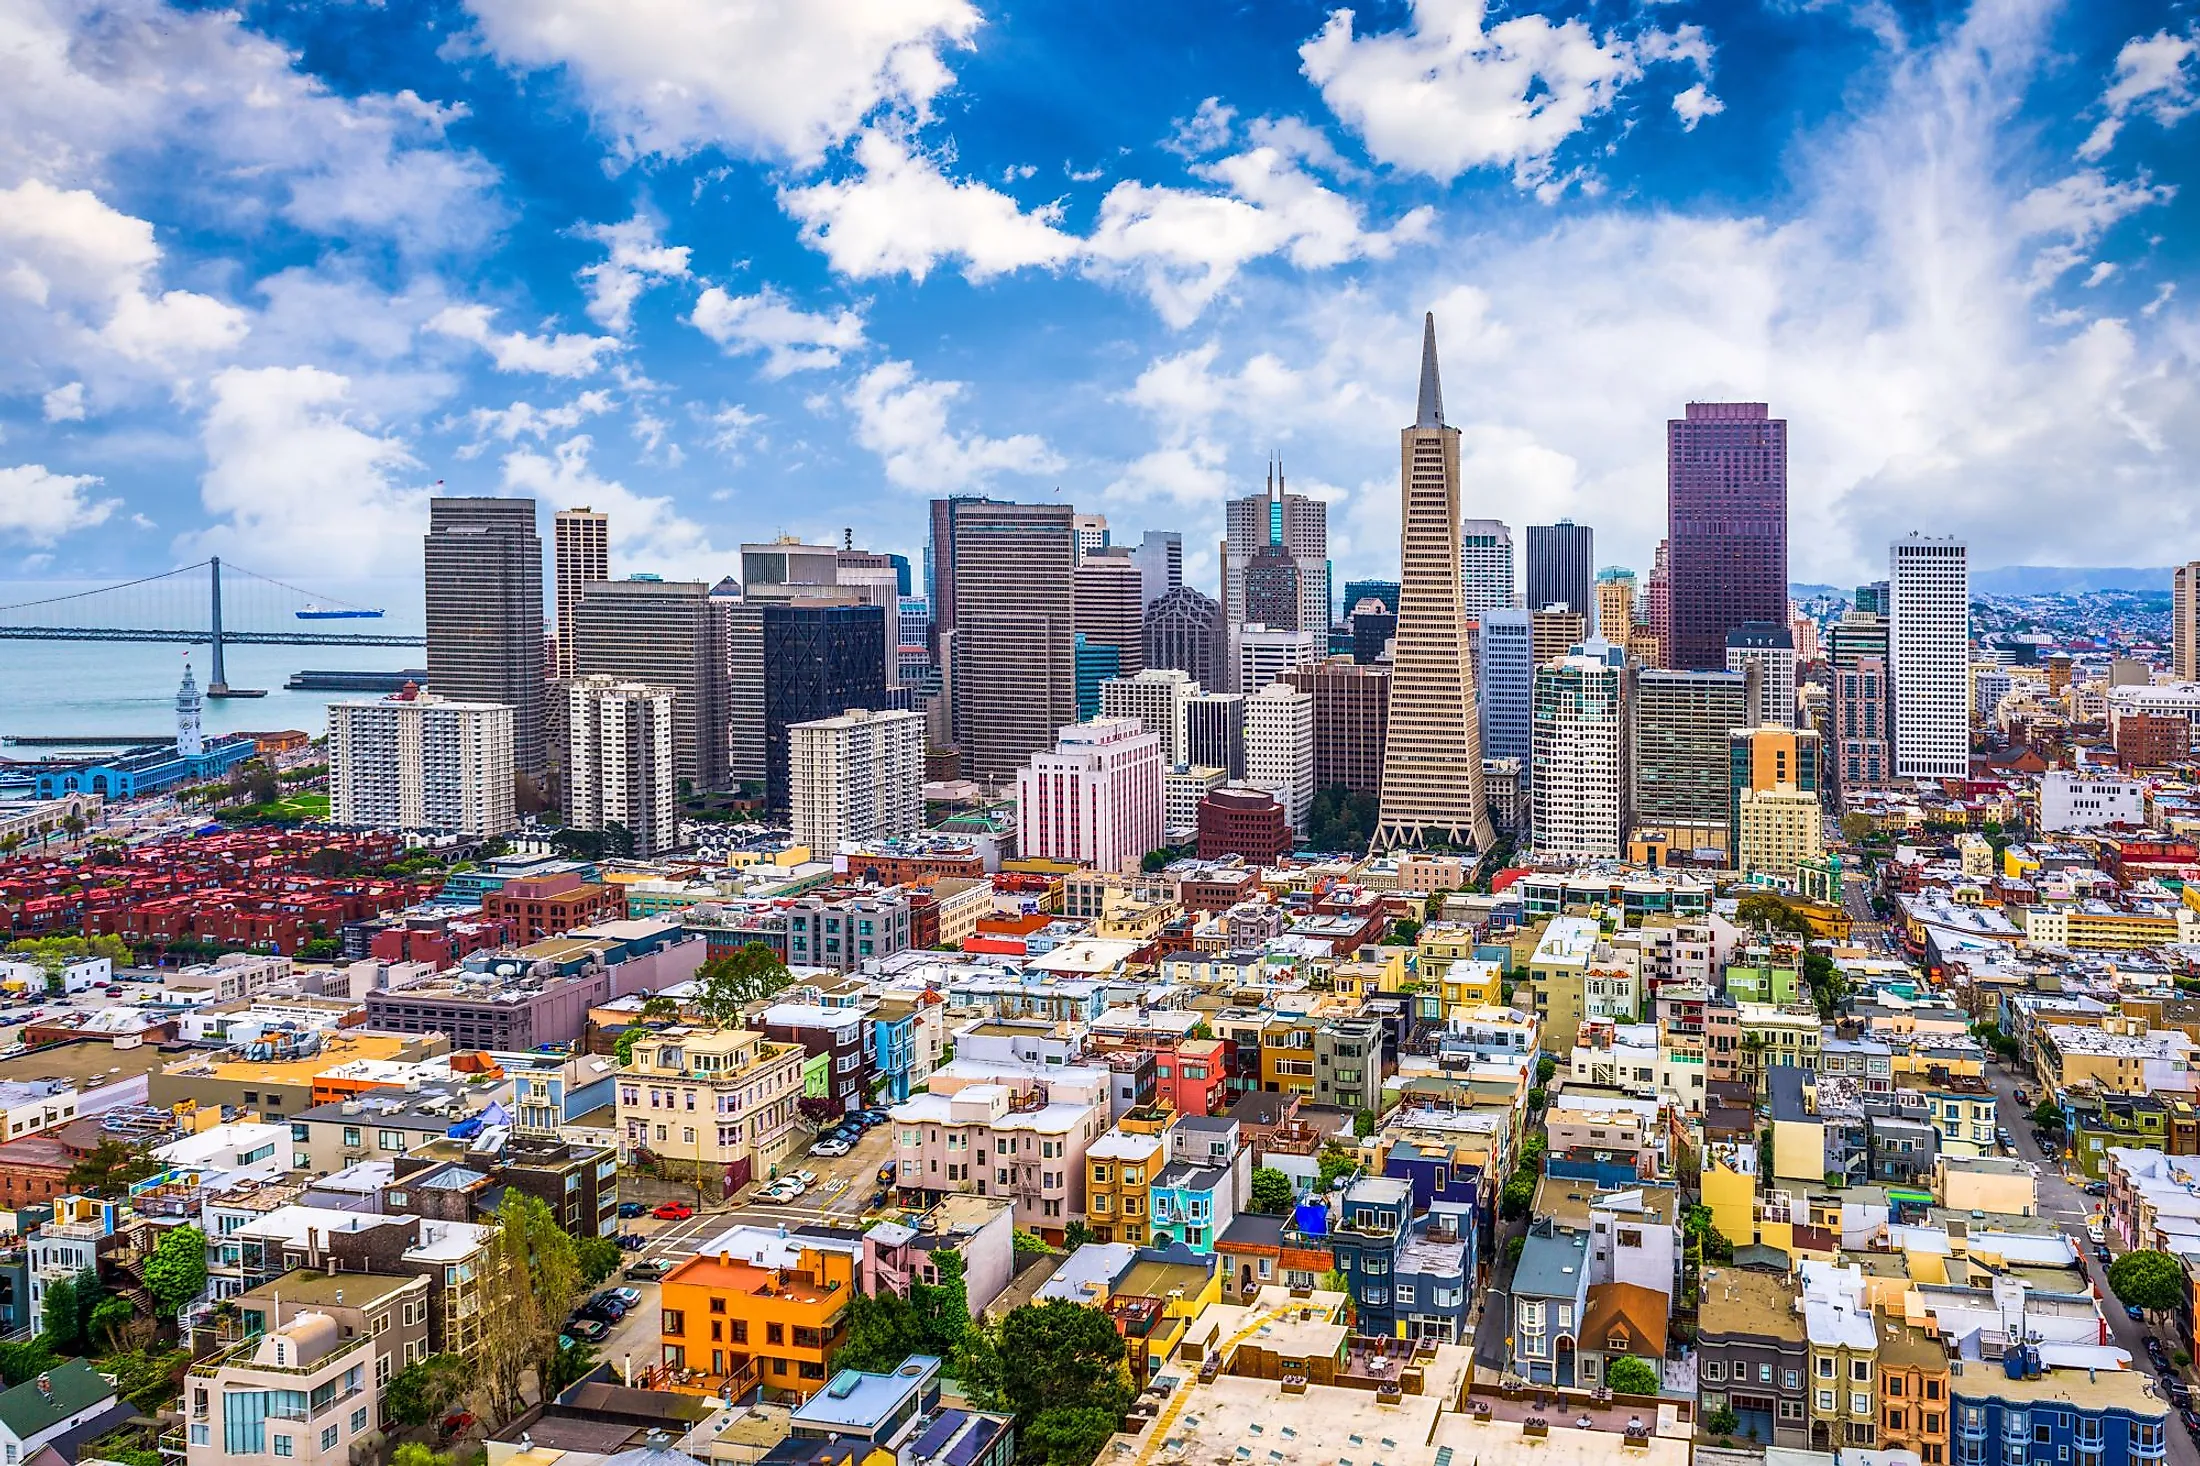 San Francisco, California Most Expensive City of united states